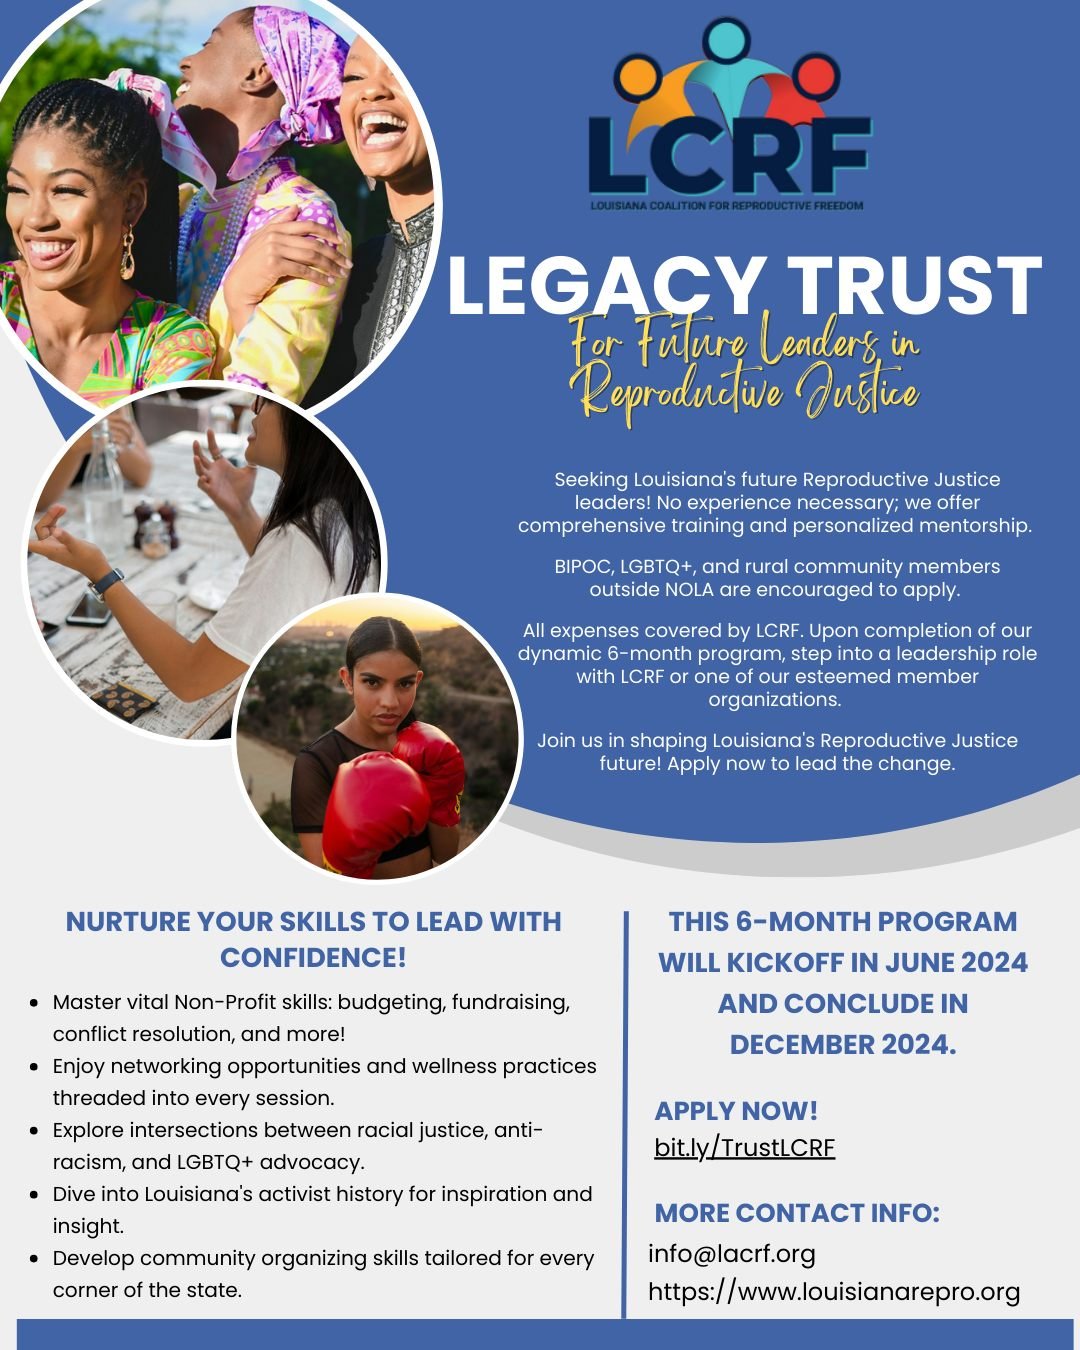 DID YOU KNOW you can now nominate emerging Reproductive Justice leaders for our all-expenses-paid leadership development and mentorship program, the Legacy Trust? https://forms.gle/373Av7tYGs9MdYPj6